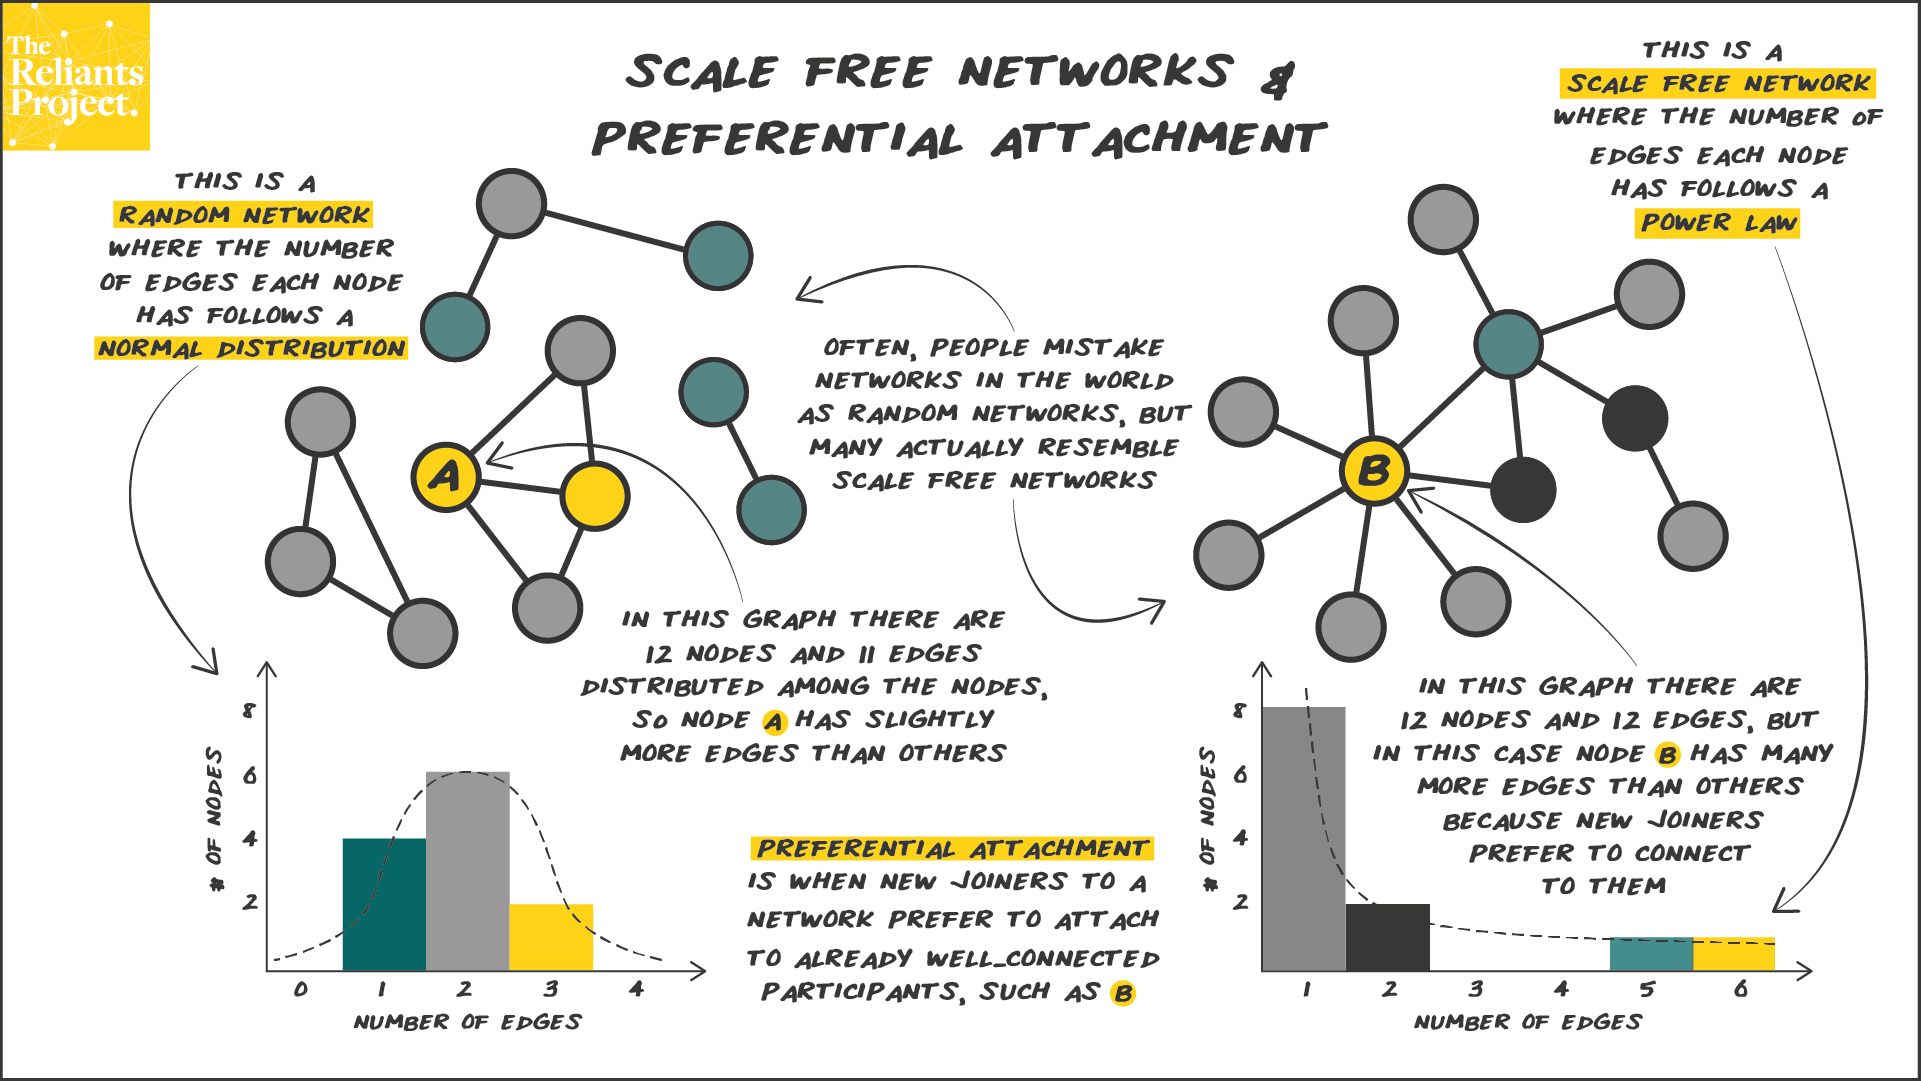 Concept 9: Scale Free Networks and Preferential Attachment | THE RELIANTS PROJECT